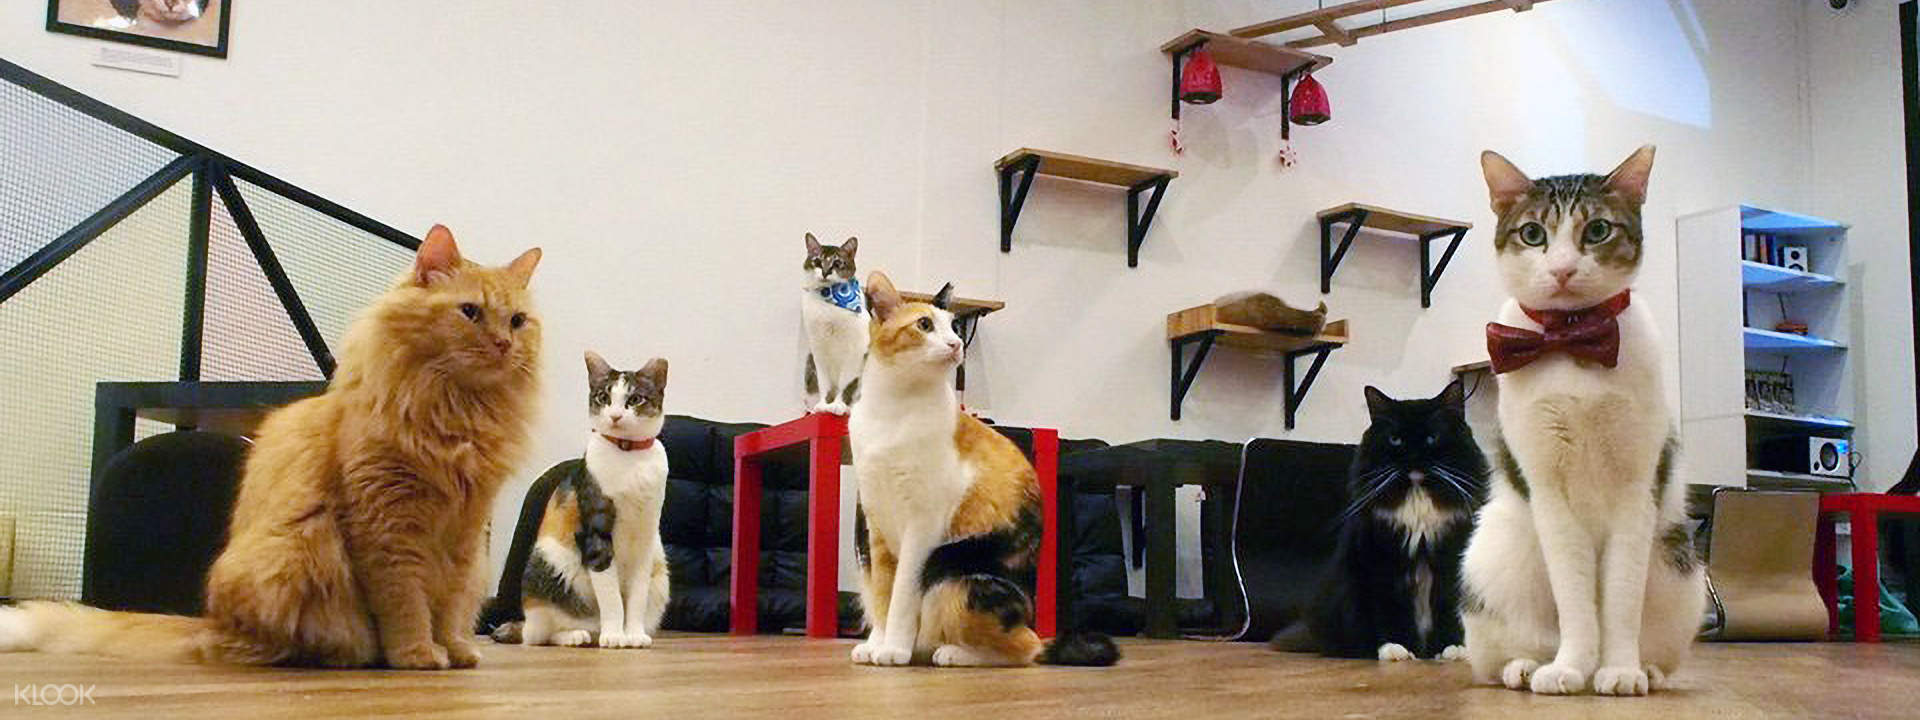 Up to 15% Off | The Cat Cafe Discounted Entrance Fee in Bugis